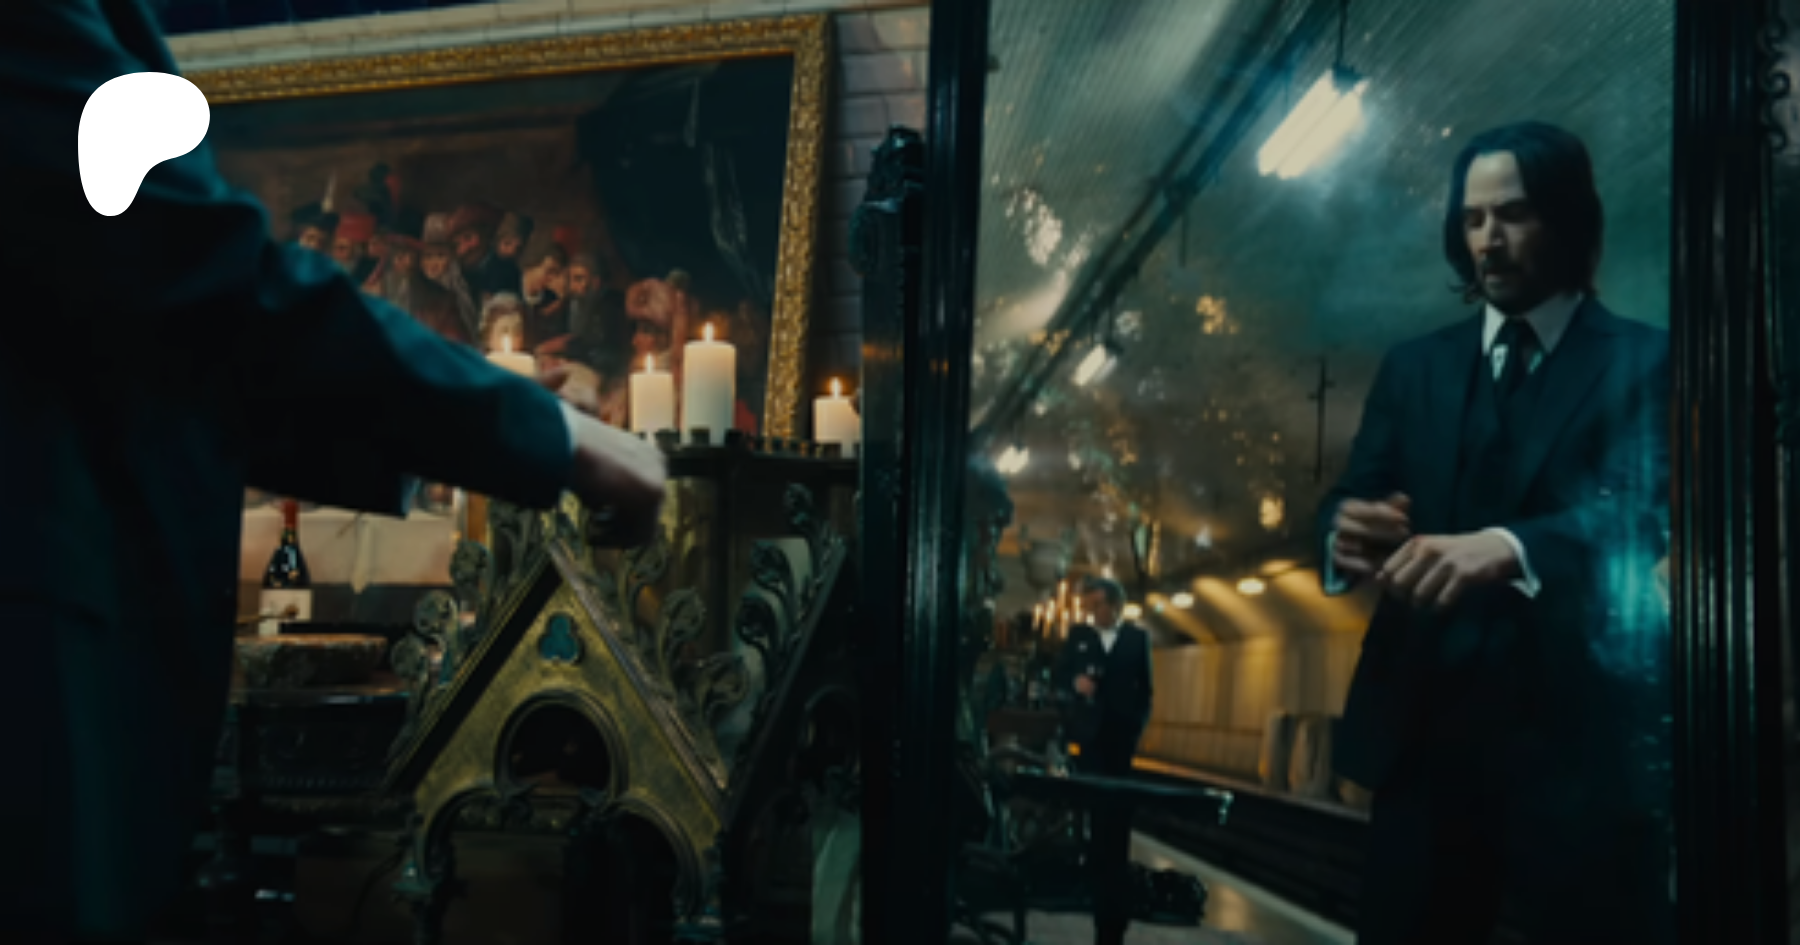 In John Wick (2023) a painting of the Feast of Herod references a